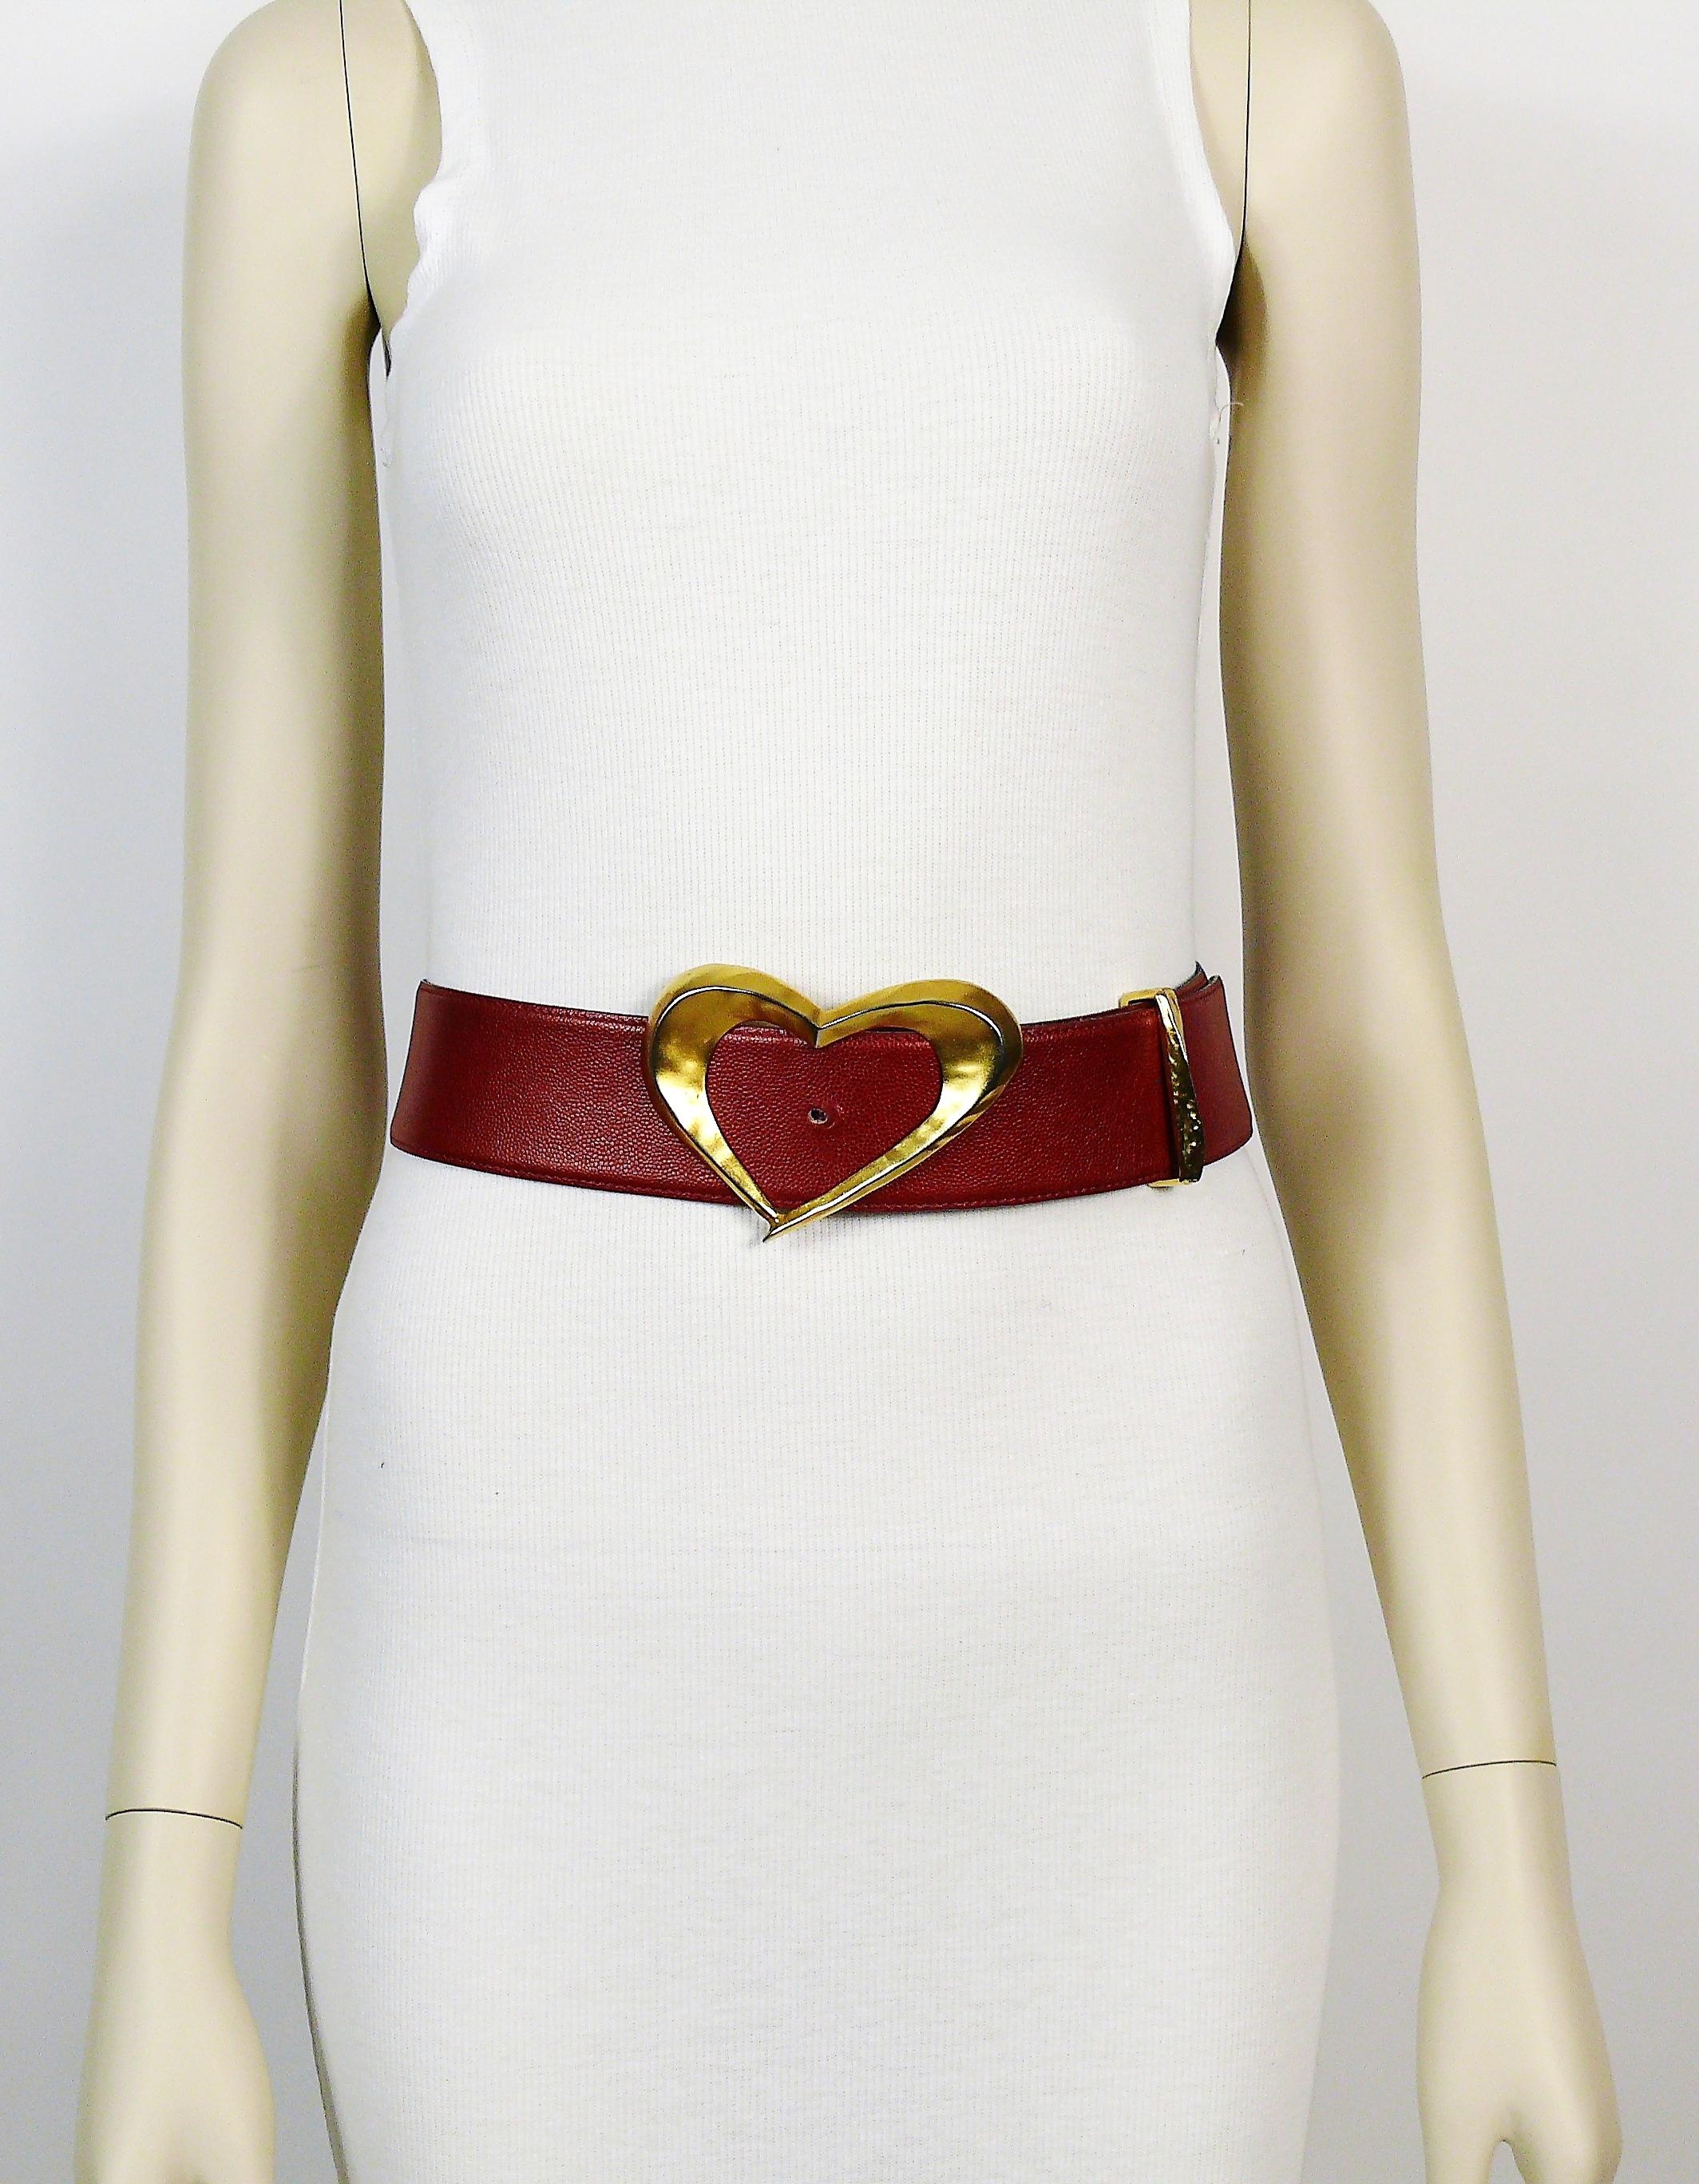 Women's CHRISTIAN LACROIX Vintage Red Grained Leather Belt with Oversized Heart Buckle For Sale